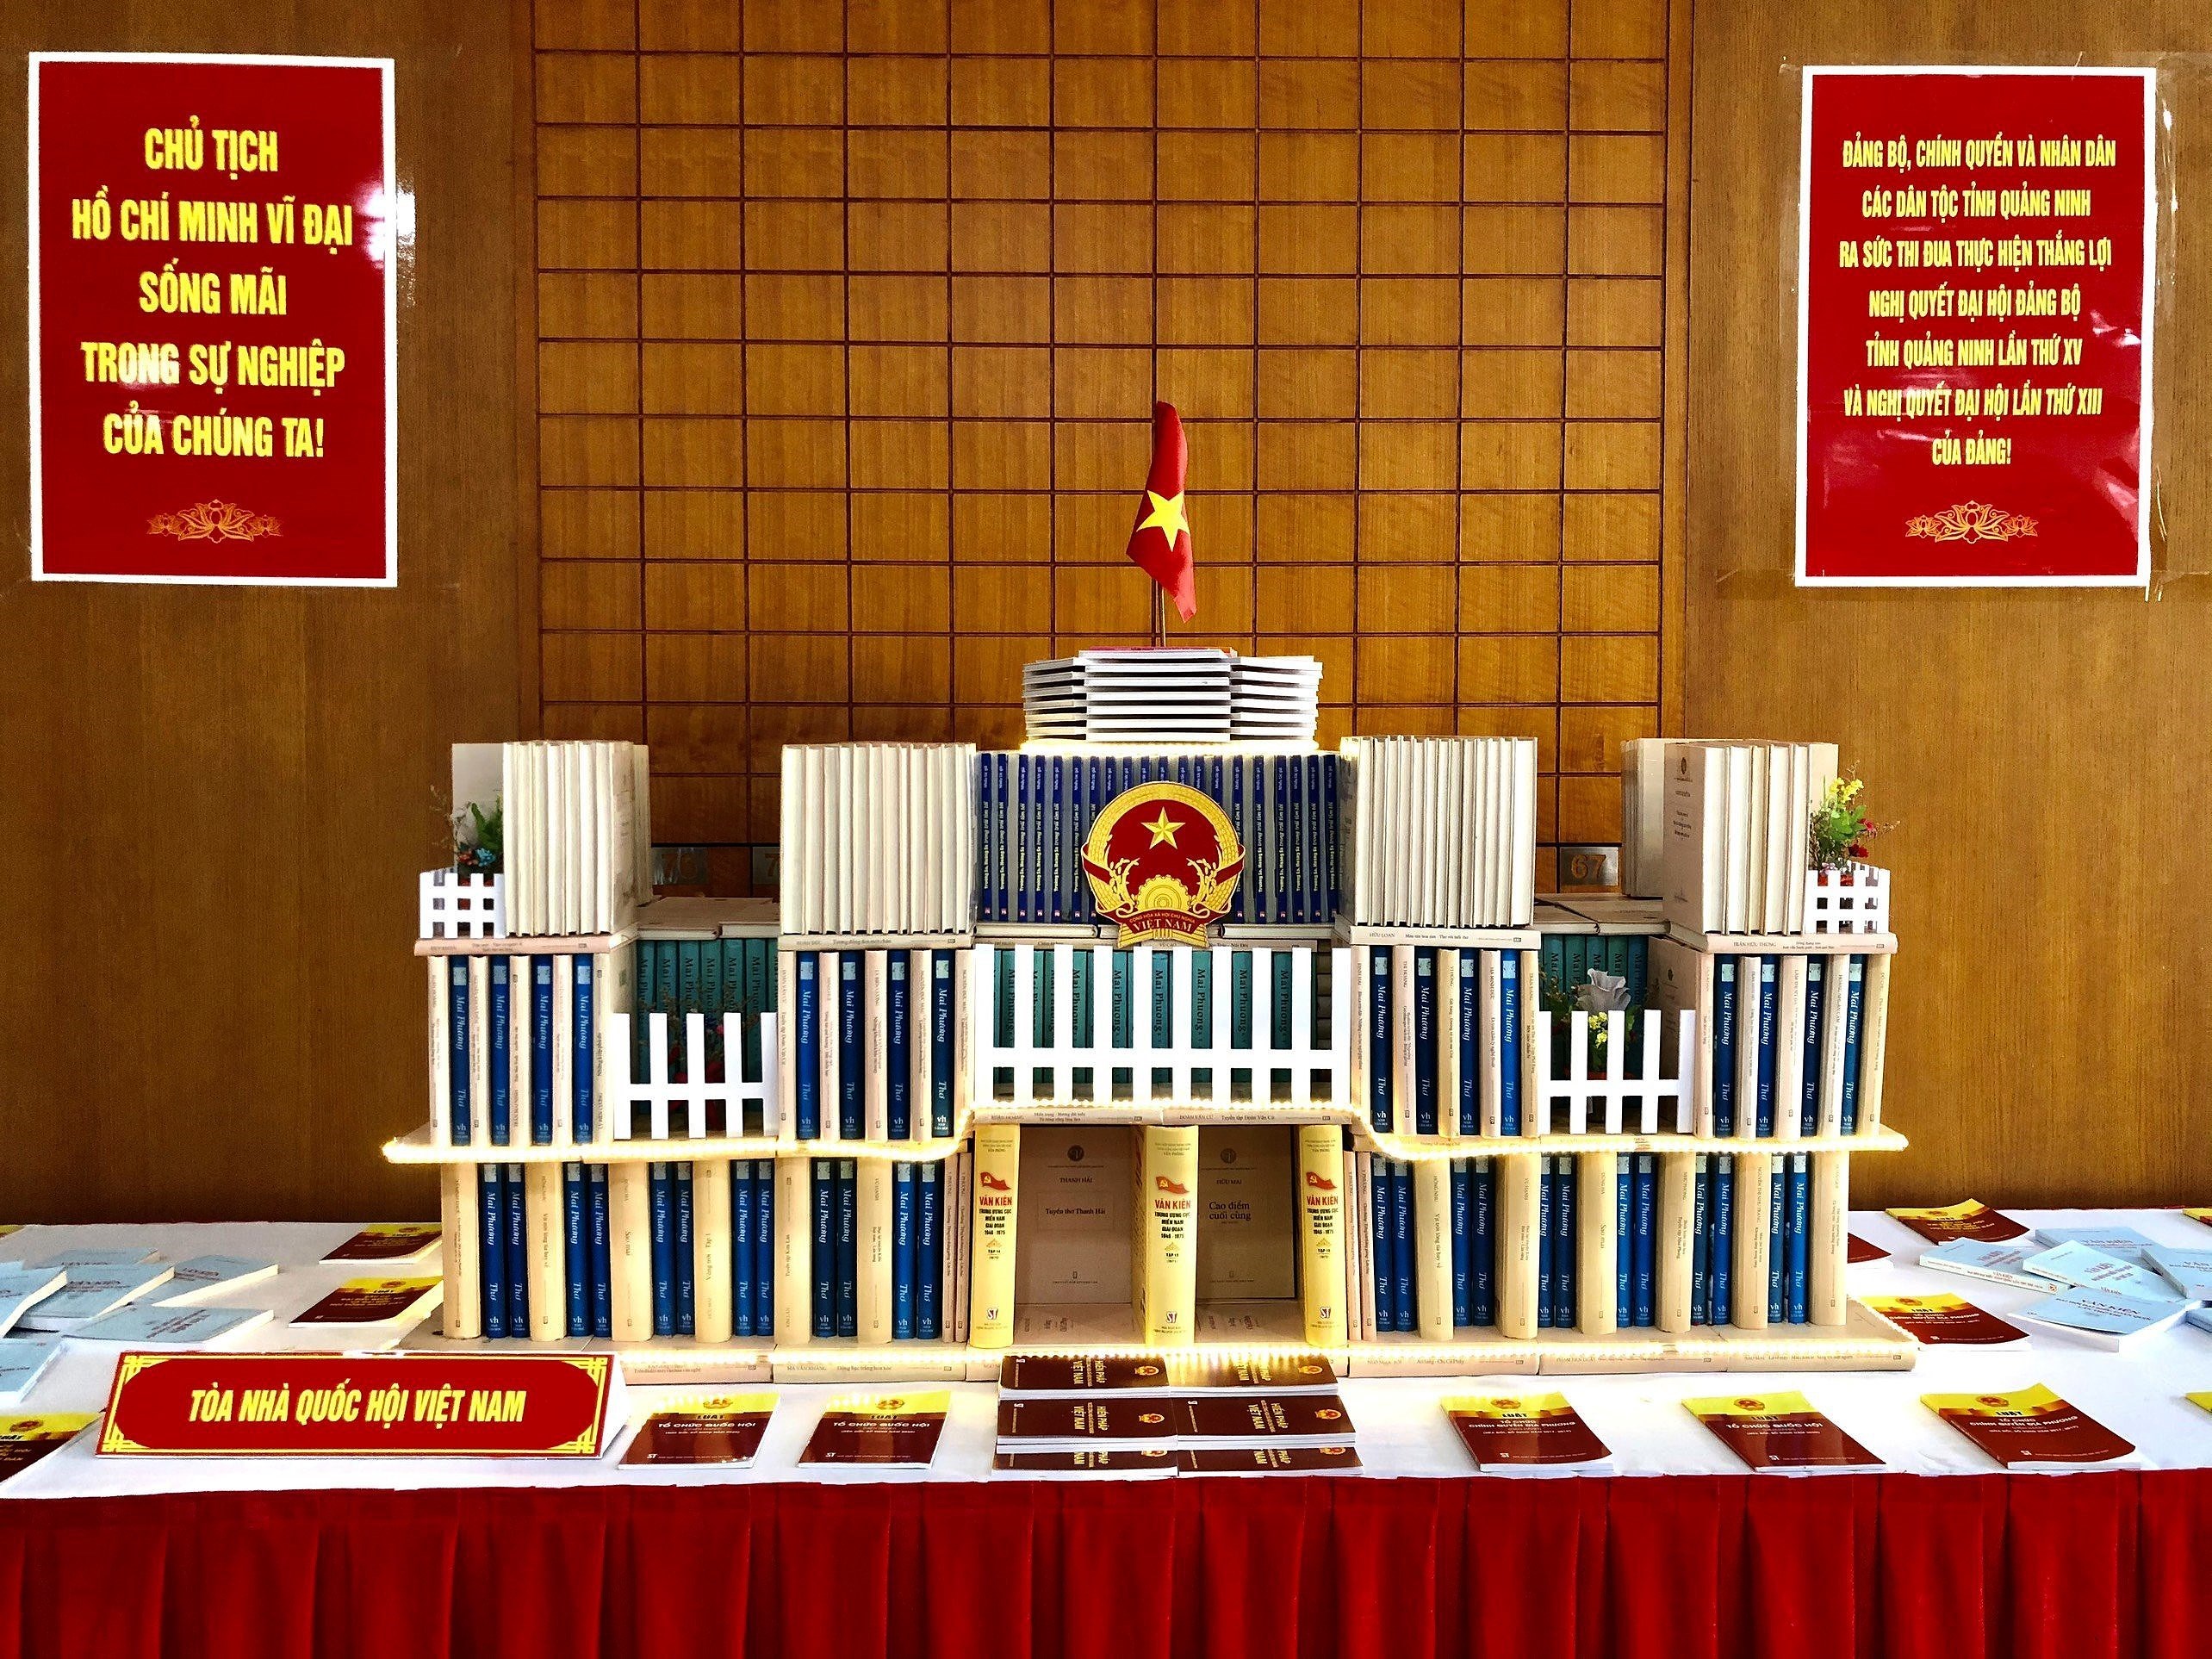 Books on election on display in Quang Ninh province hinh anh 4